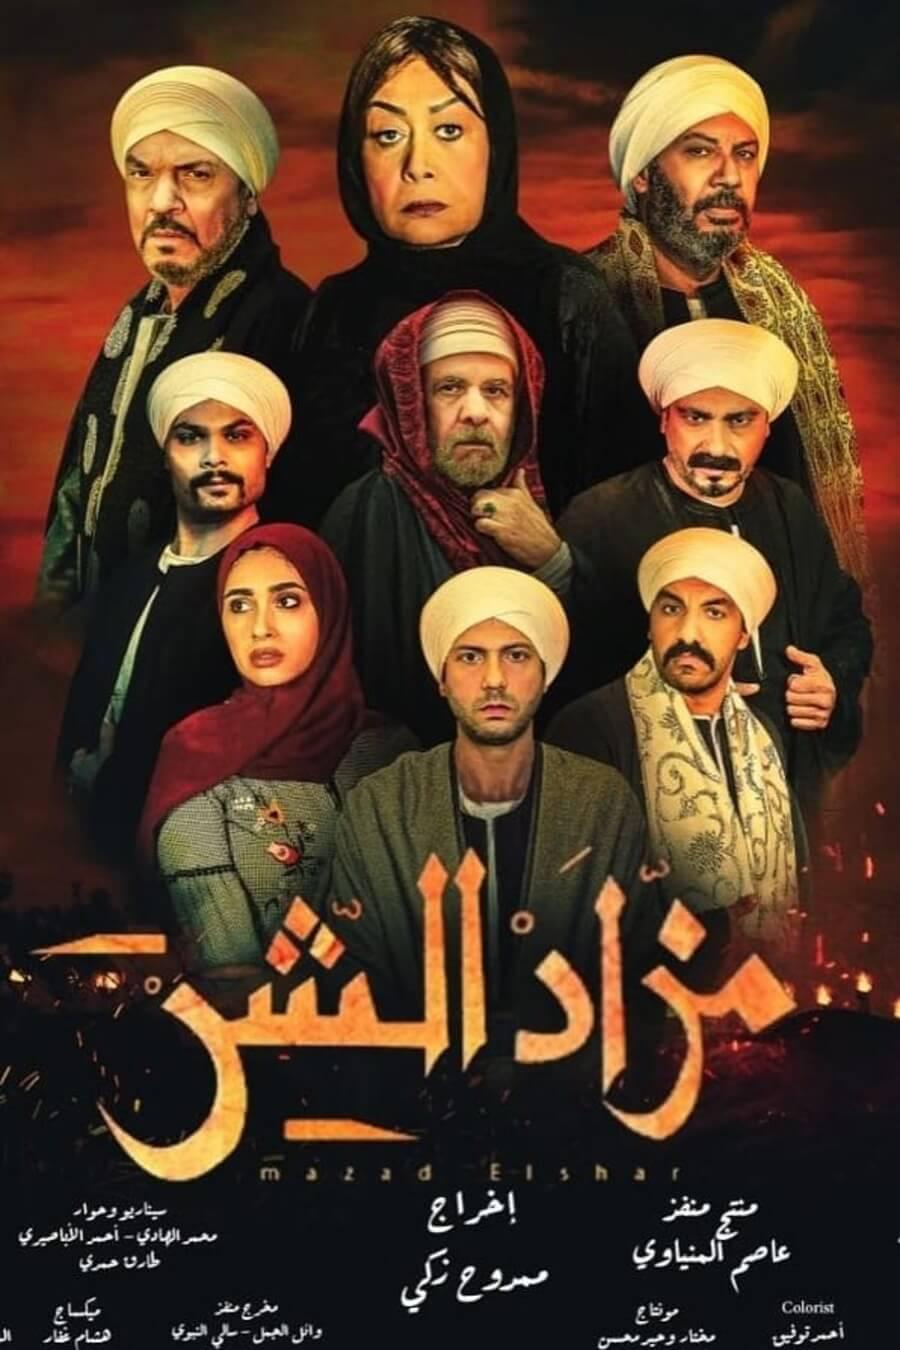 TV ratings for Mazad El Shar (مزاد الشر) in Norway. TOD TV series